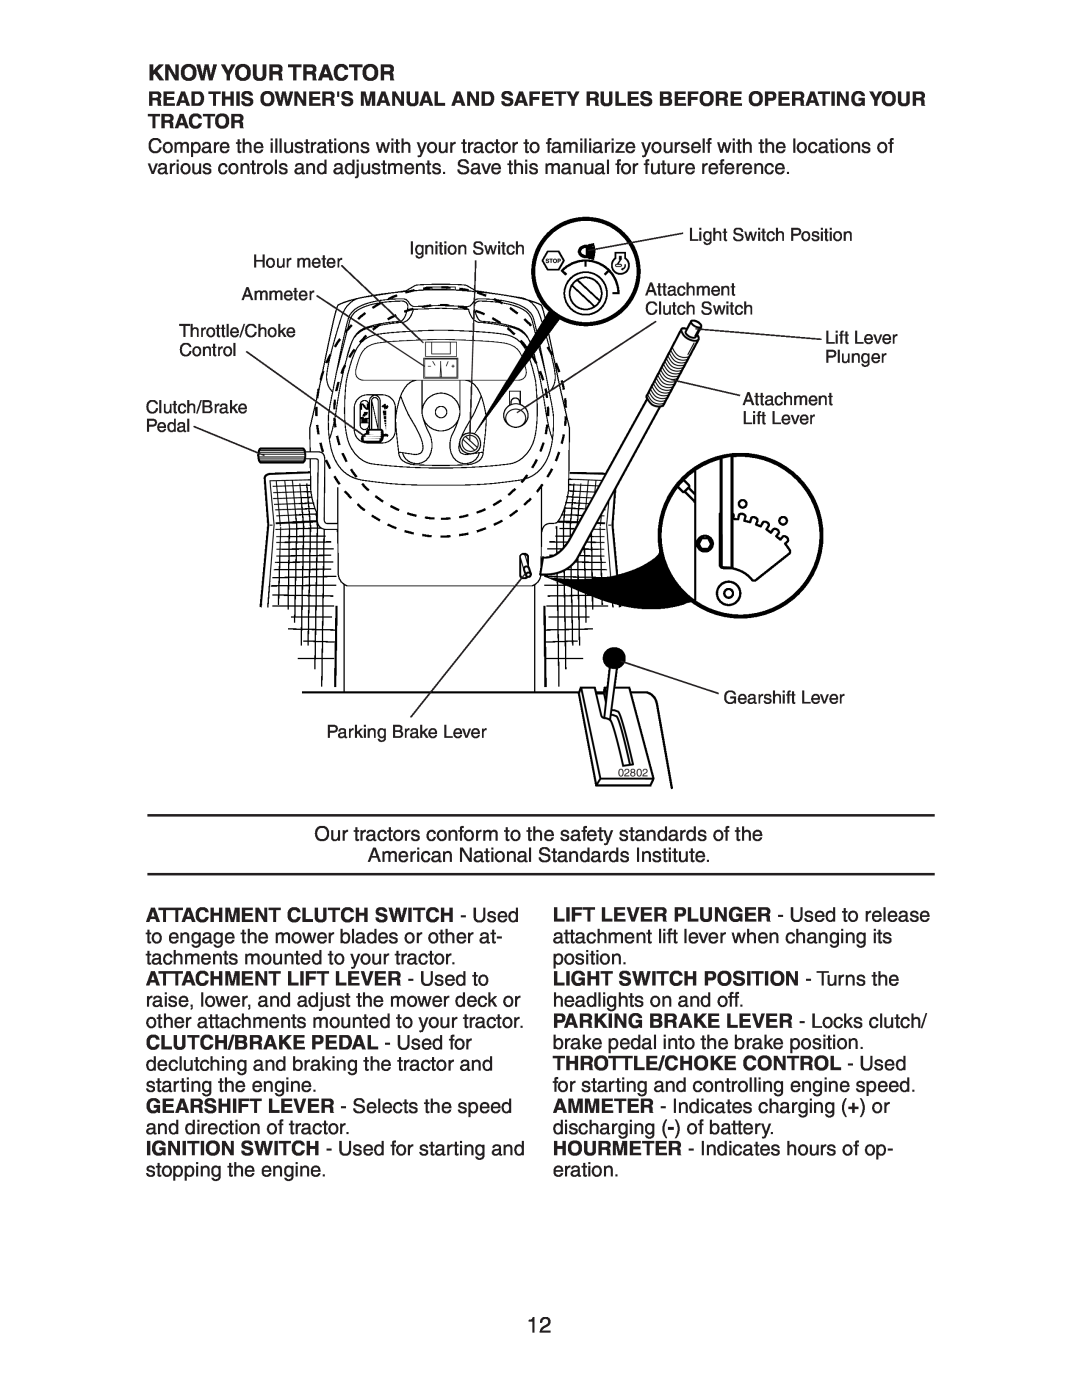 Poulan CO18542STB manual Know Your Tractor, LIGHT SWITCH POSITION - Turns the headlights on and off 